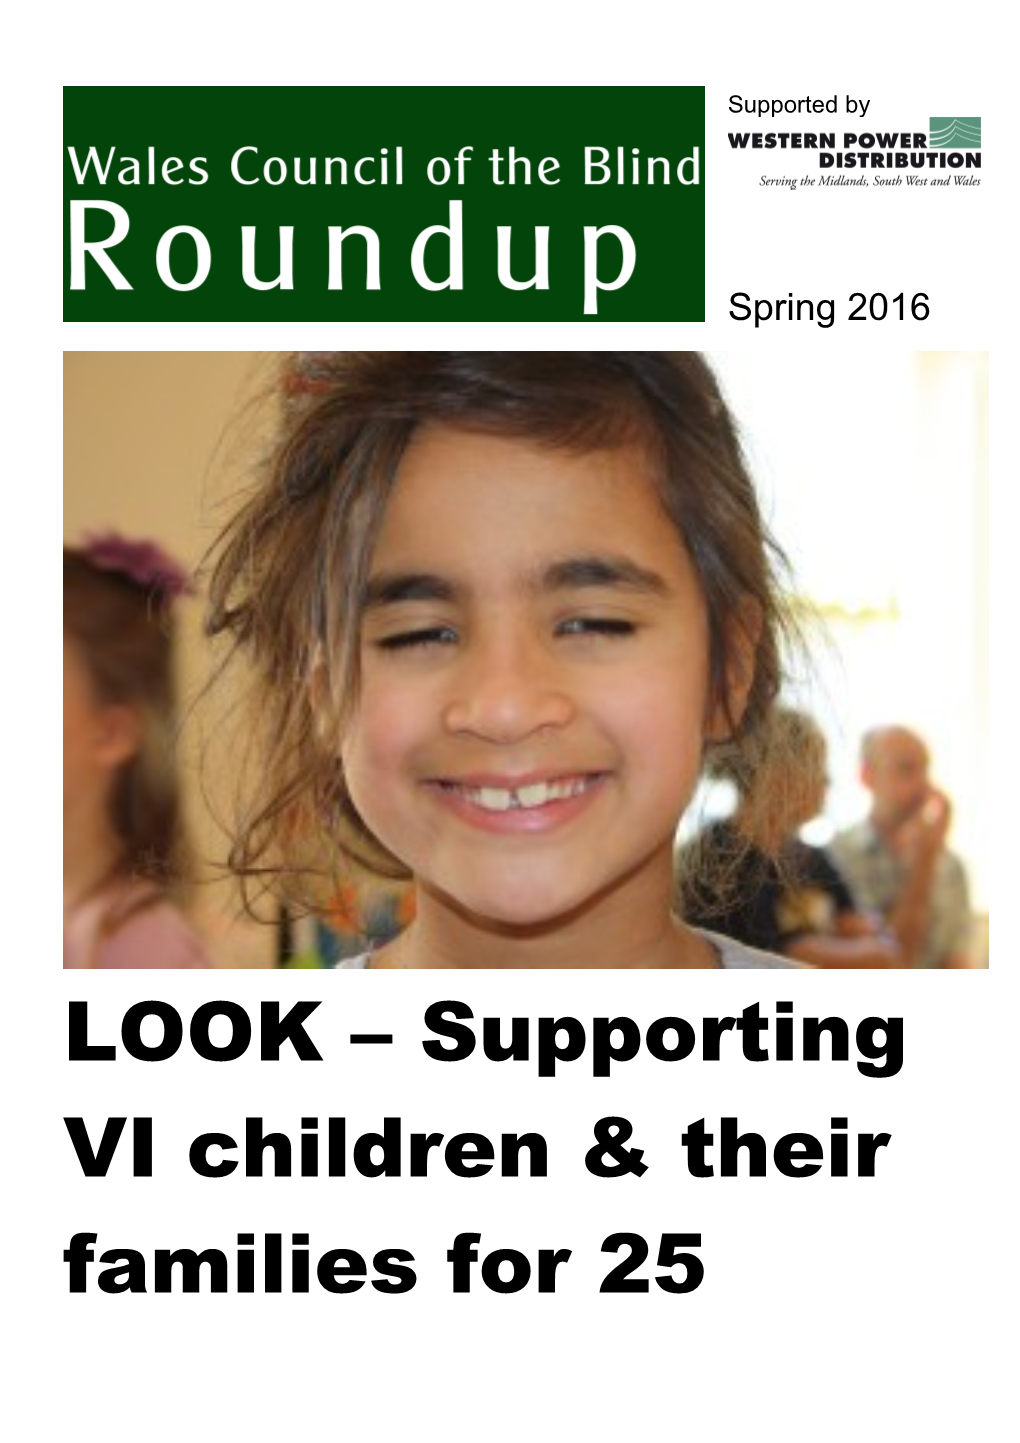 LOOK Supporting VI Children & Their Families for 25 Years in the Supplement: Finding Funding